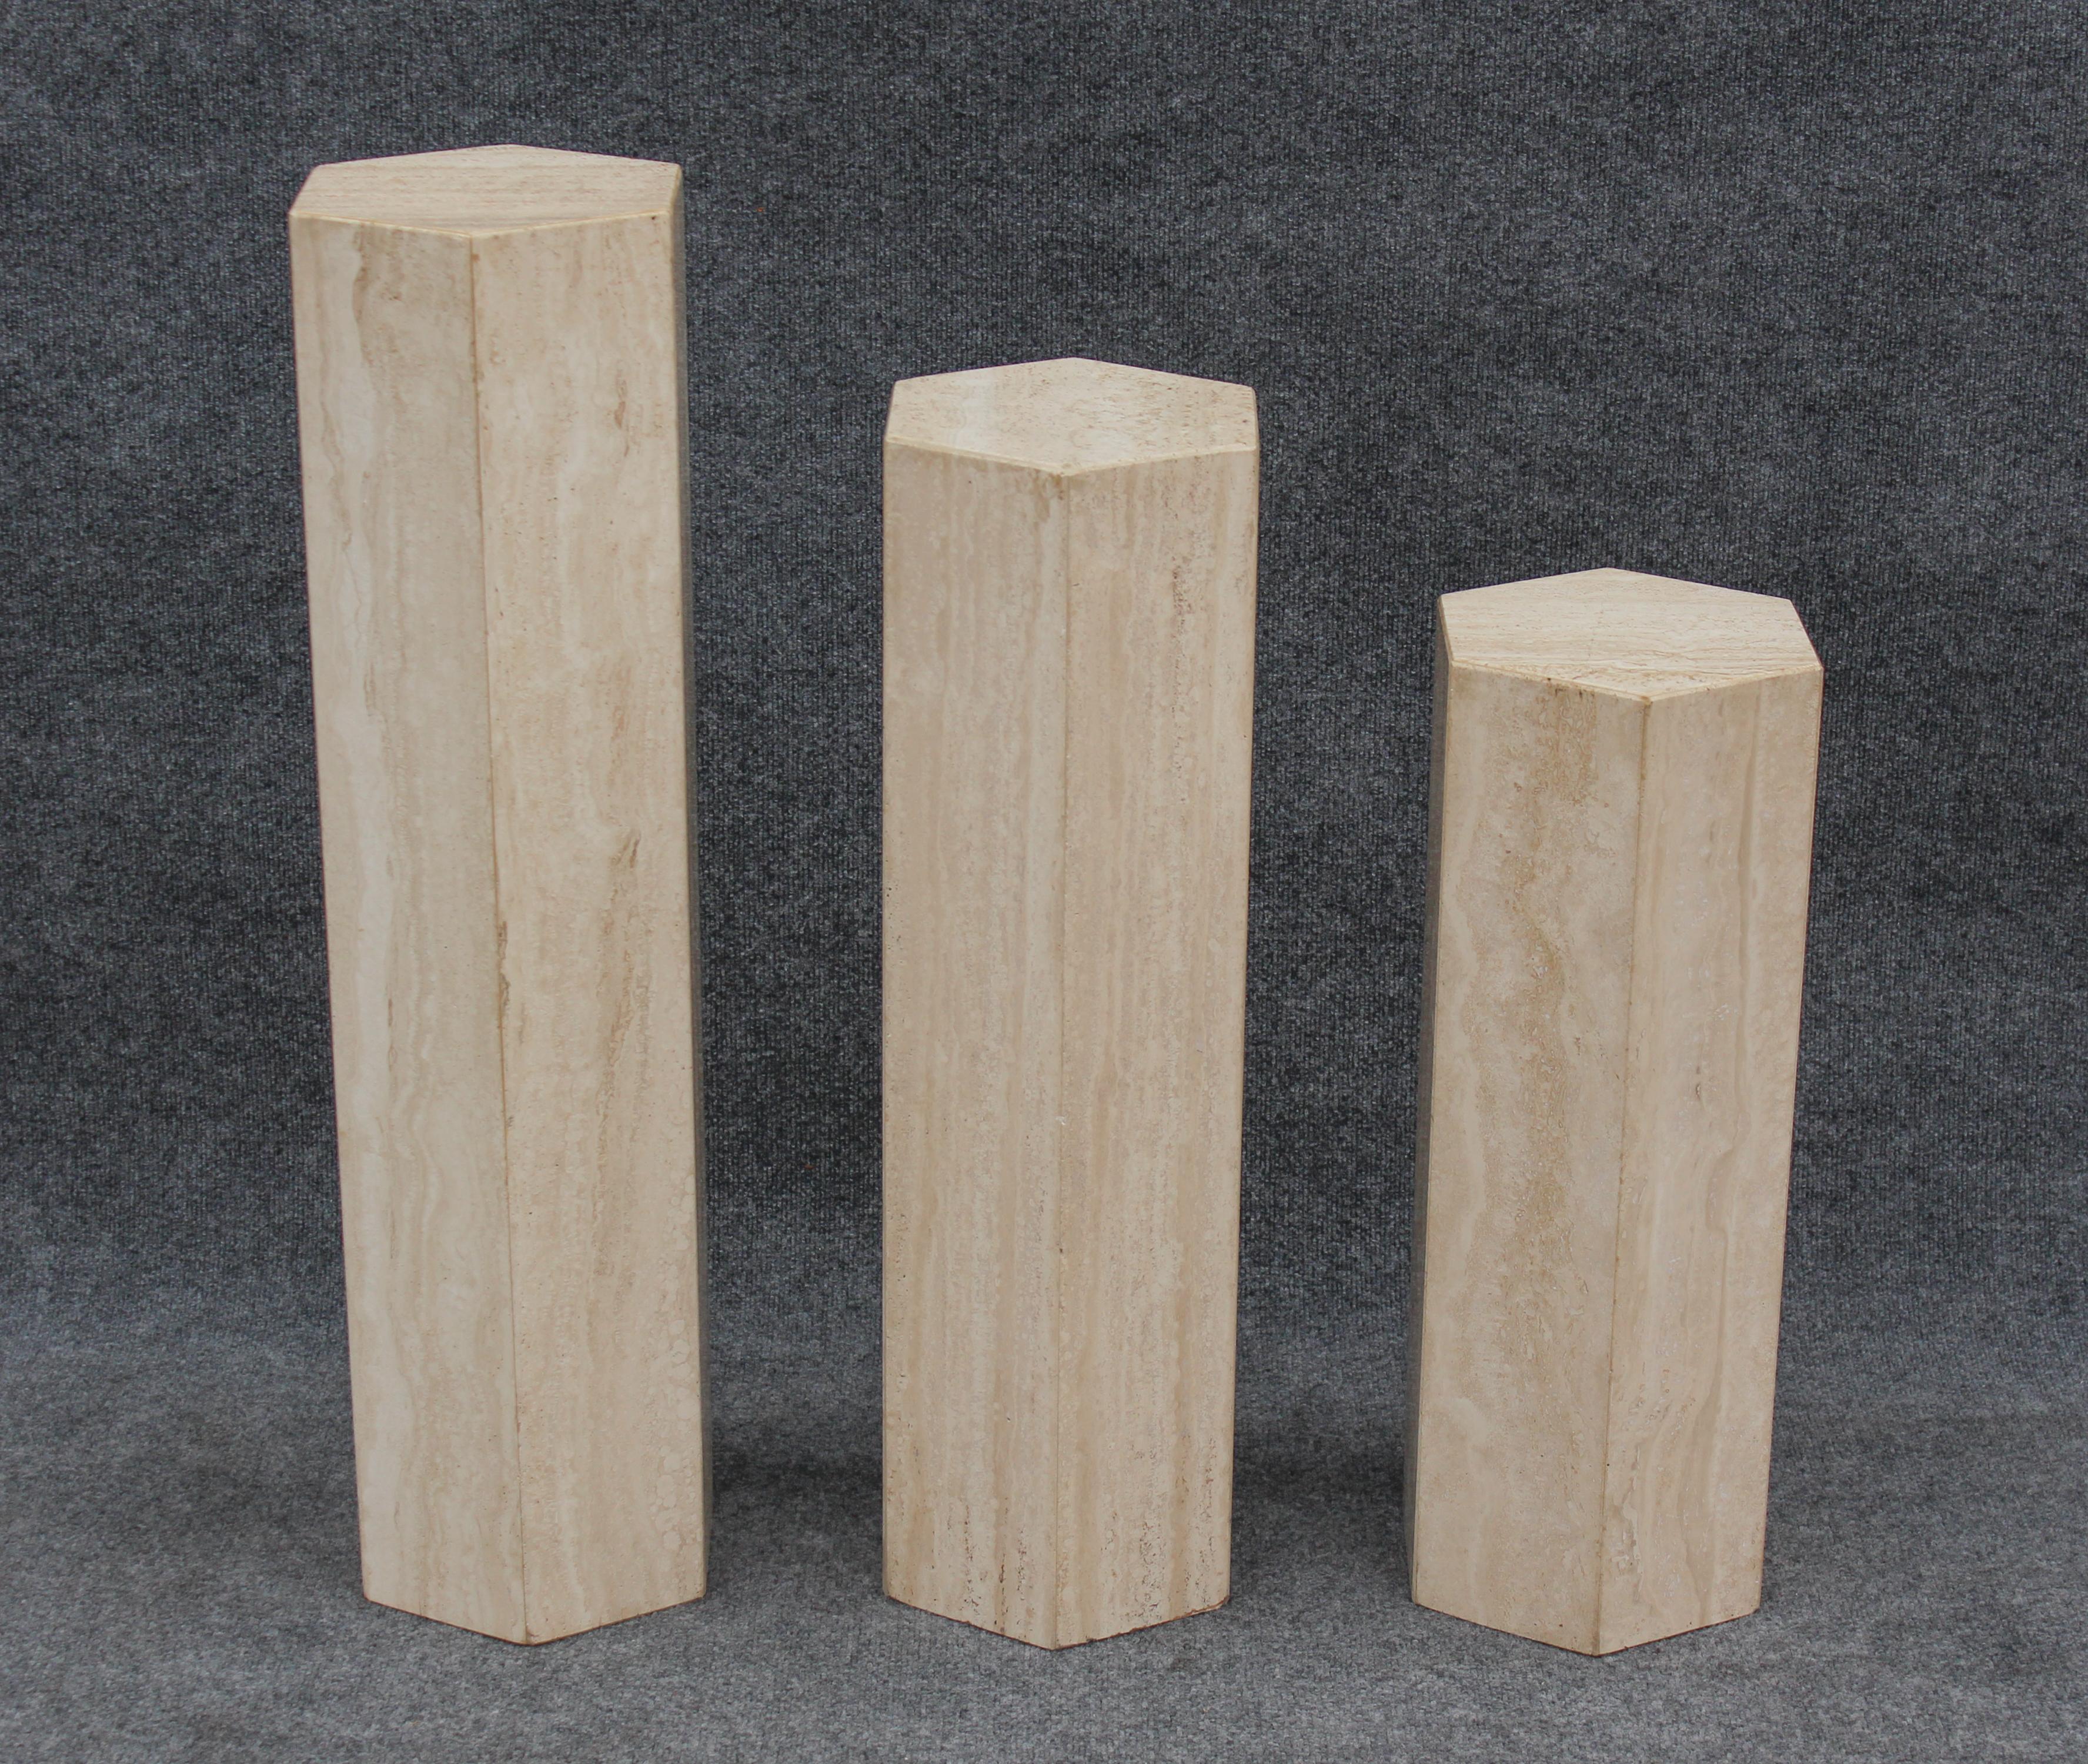 In the style of Stone International, this matching set of travertine pedestals share the excellent construction quality common of Italian products, but a more dynamic design than many others. The maker evidently took great care in choosing the